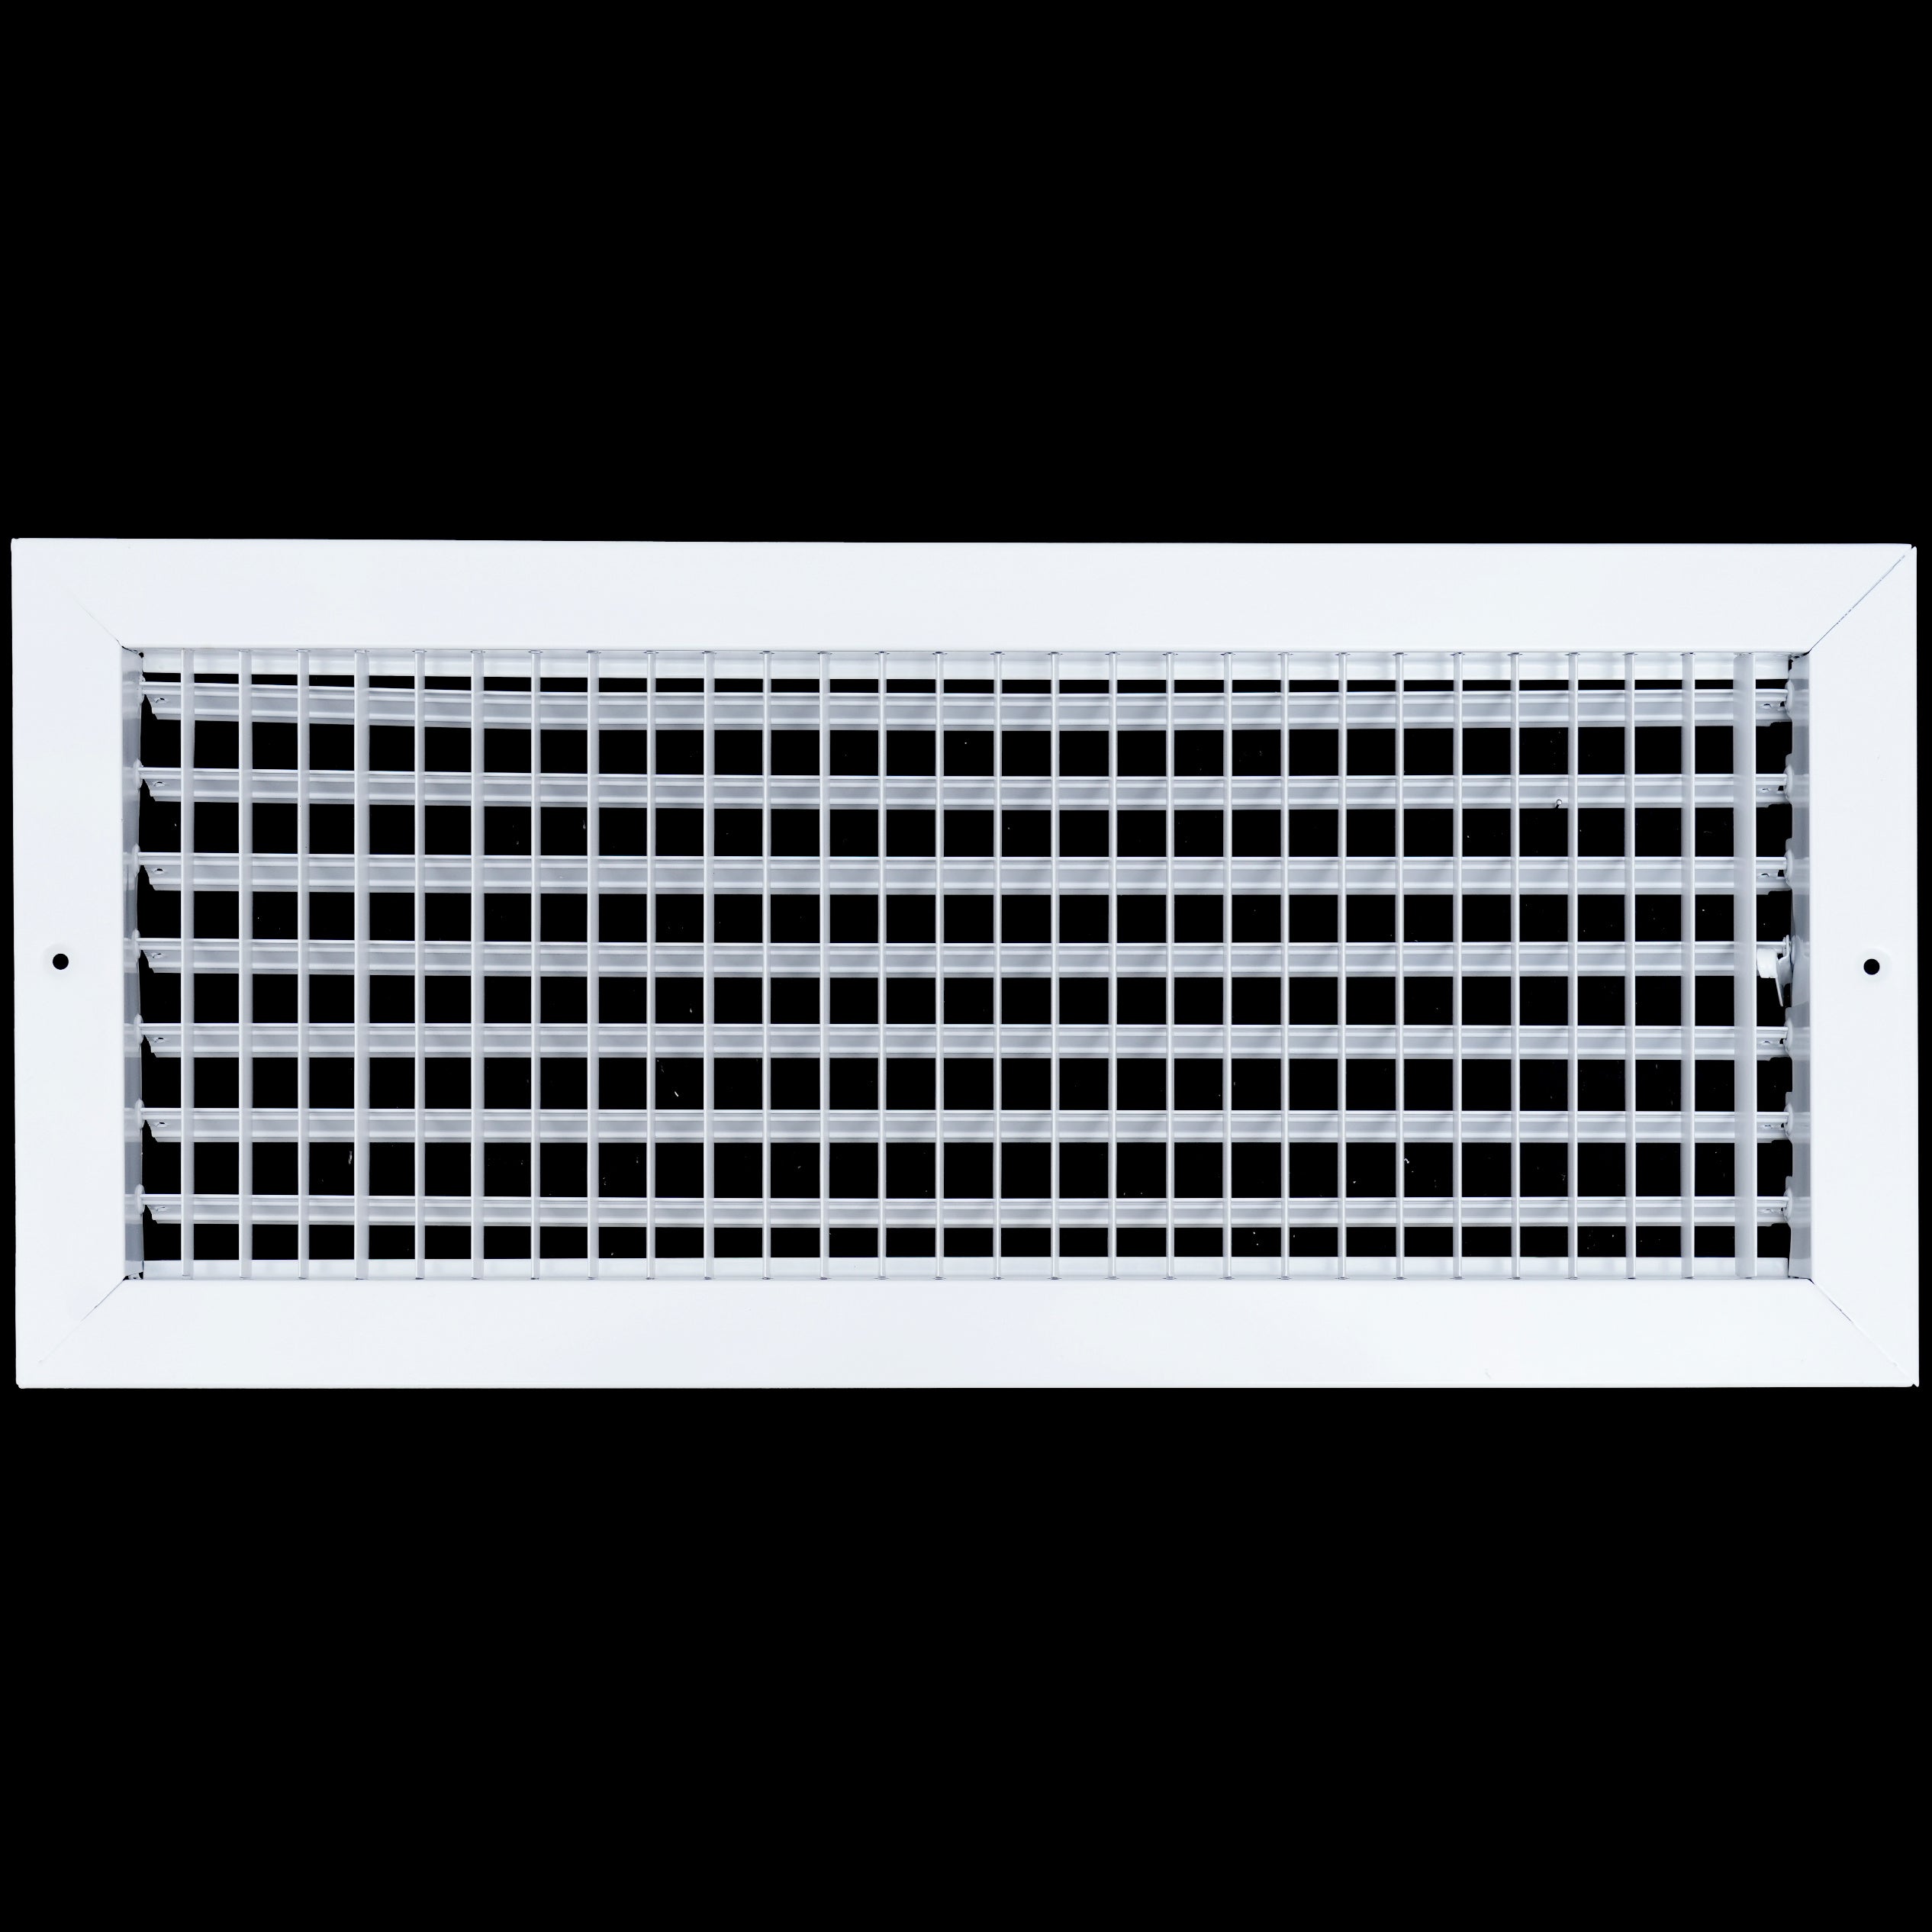 airgrilles 20"w x 8"h steel adjustable air supply grille   register vent cover grill for sidewall and ceiling   white   outer dimensions: 21.75"w x 9.75"h for 20x8 duct opening hnd-adj-wh-20x8  - 1